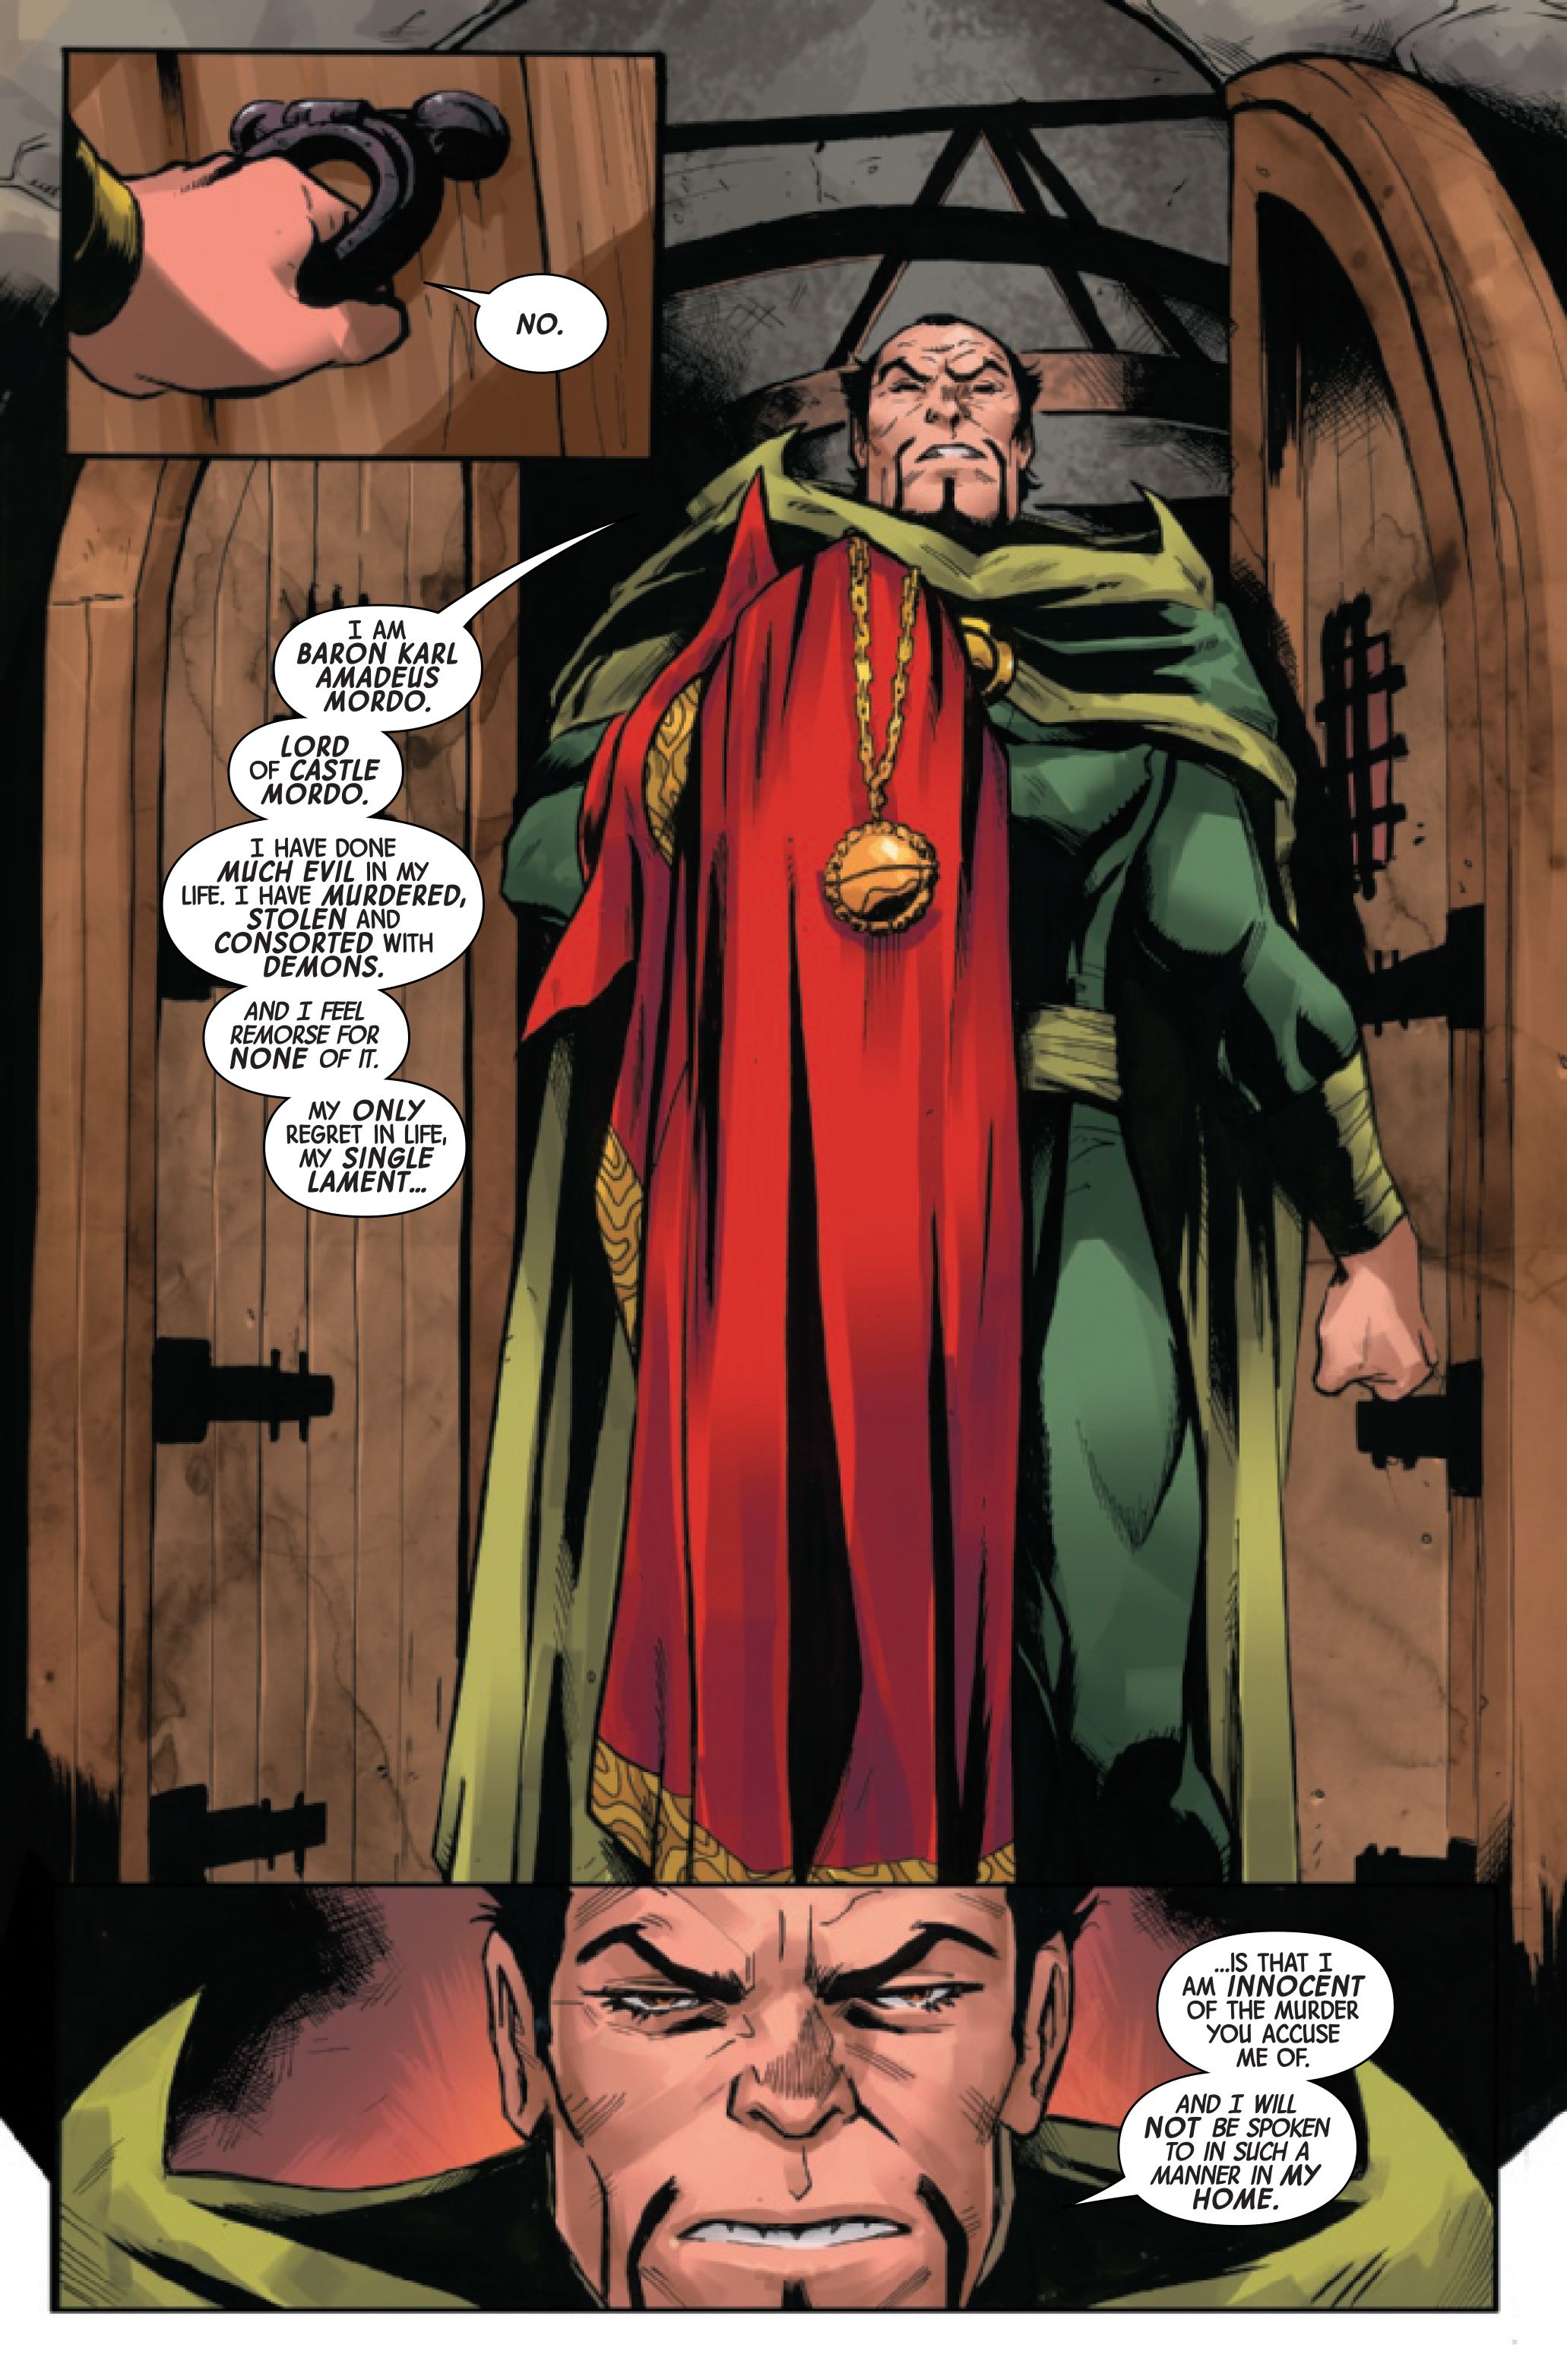 Page 2 for the Death of Doctor Strange #4, by Jed MacKay, Lee Garbett, Antonio Fabela and VC's Cory Petit.